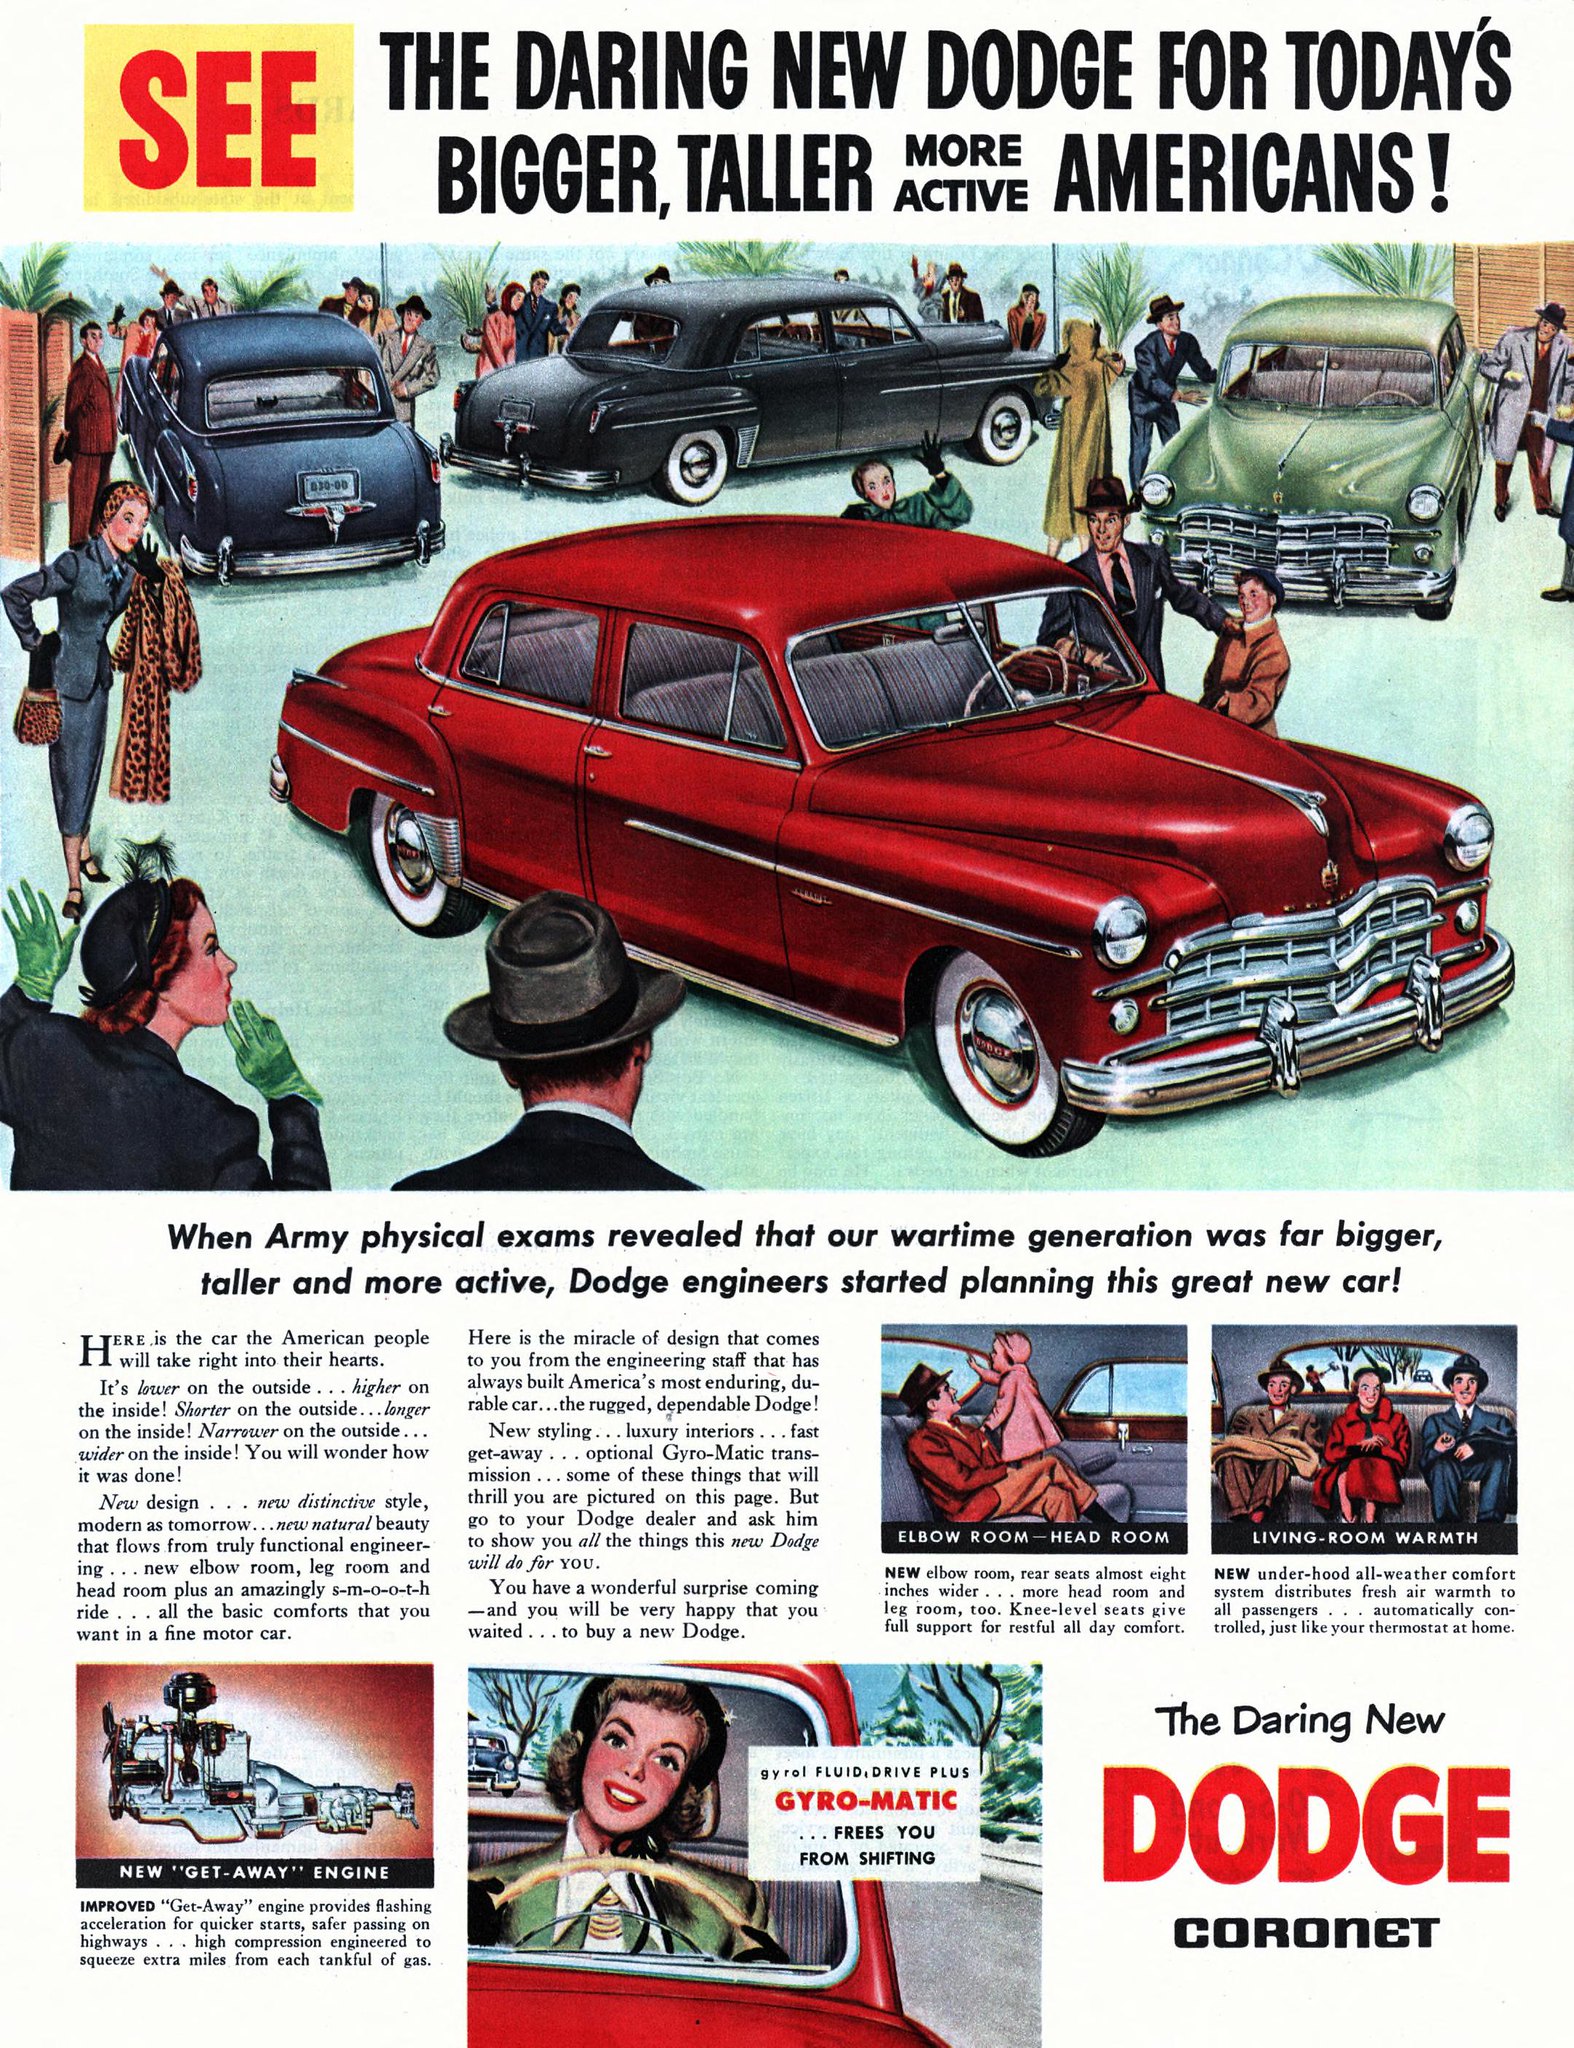 1949 Dodge Coronet - published in Collier's (Vol. 123, No. 11) - March 12, 1949